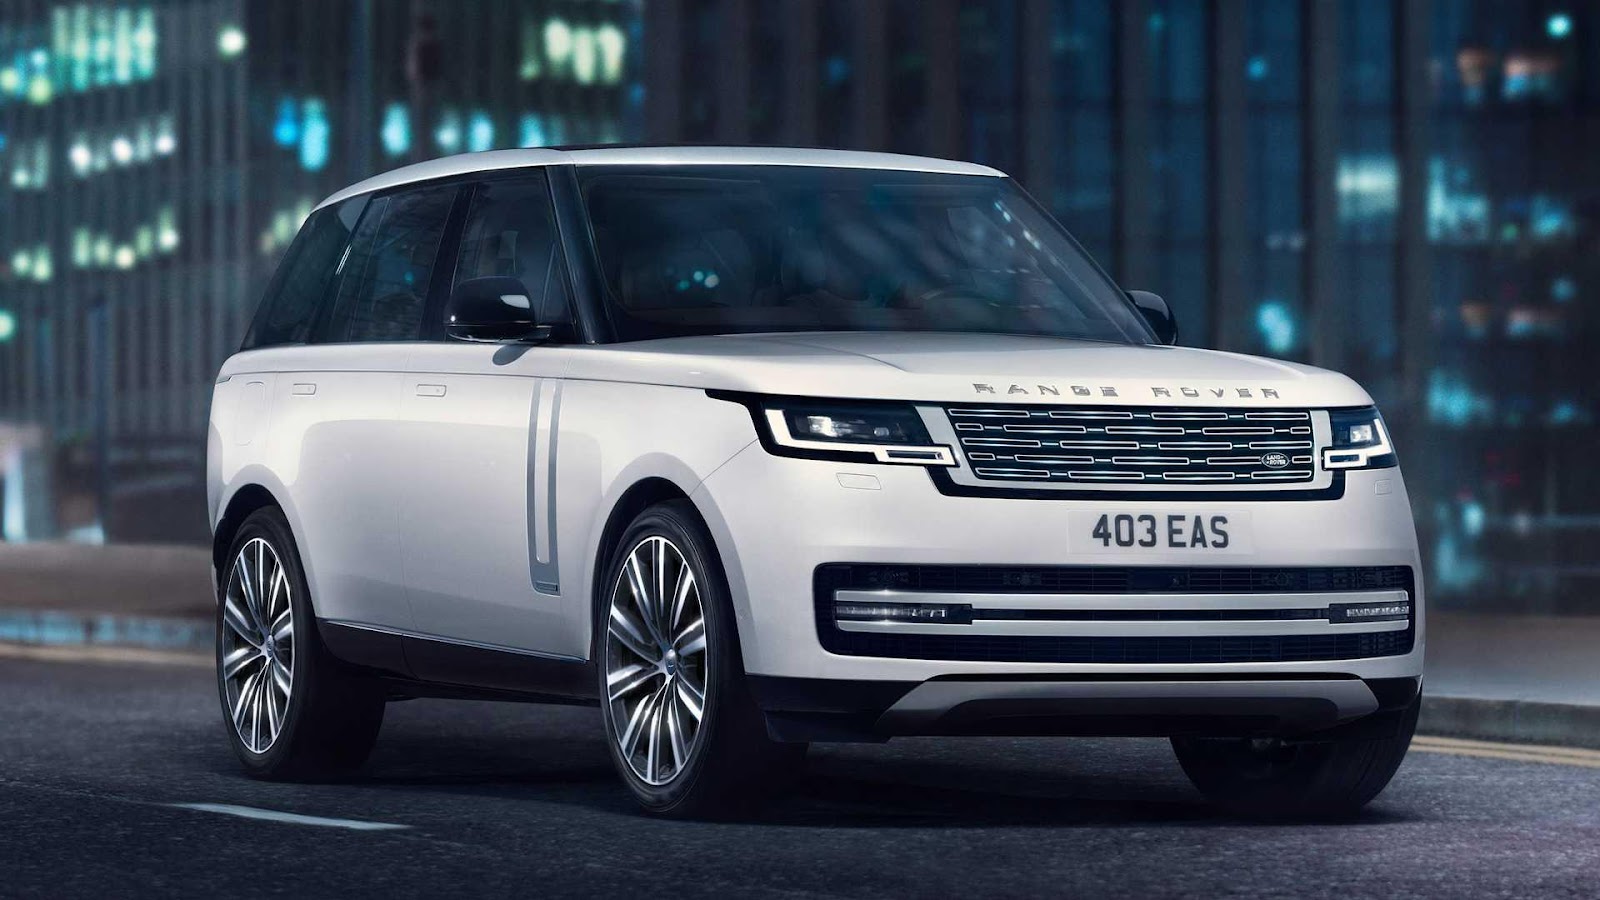 The All-New Range Rover 2022